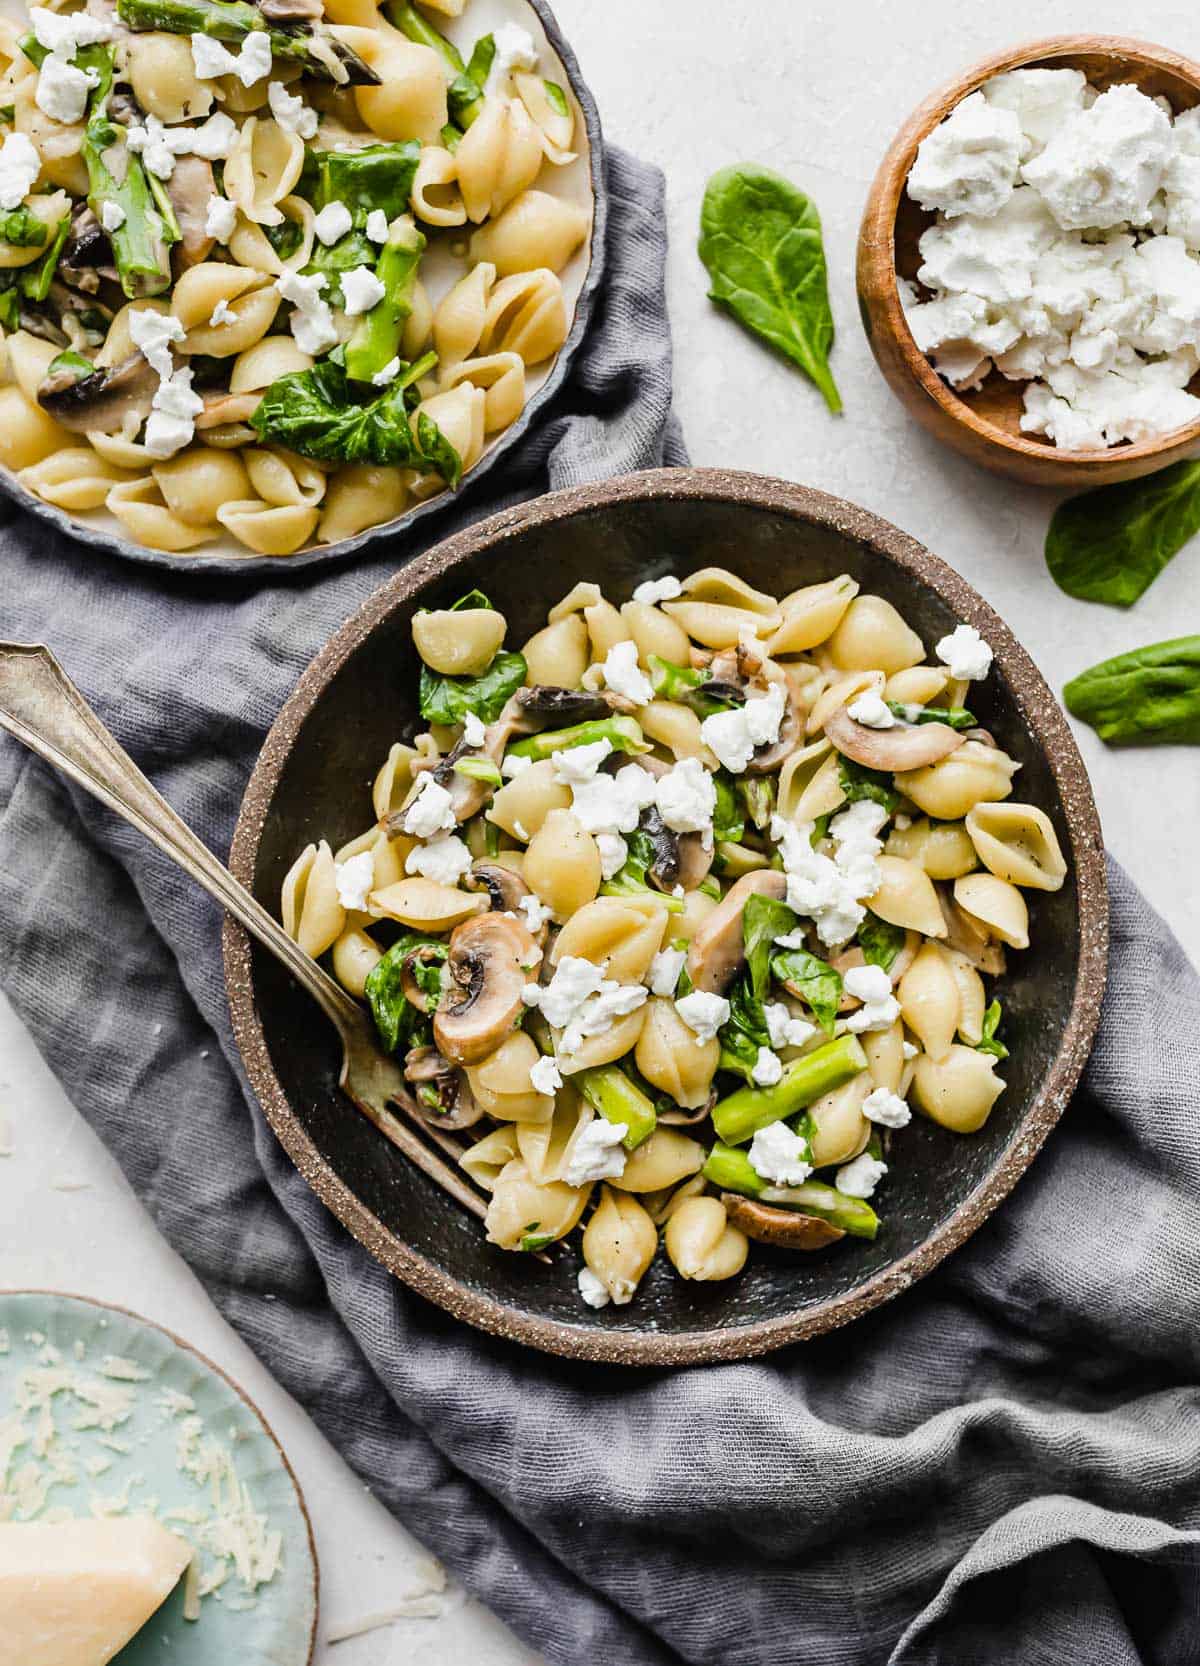 Asparagus Spinach Pasta in a black bowl, with goat cheese over the pasta.